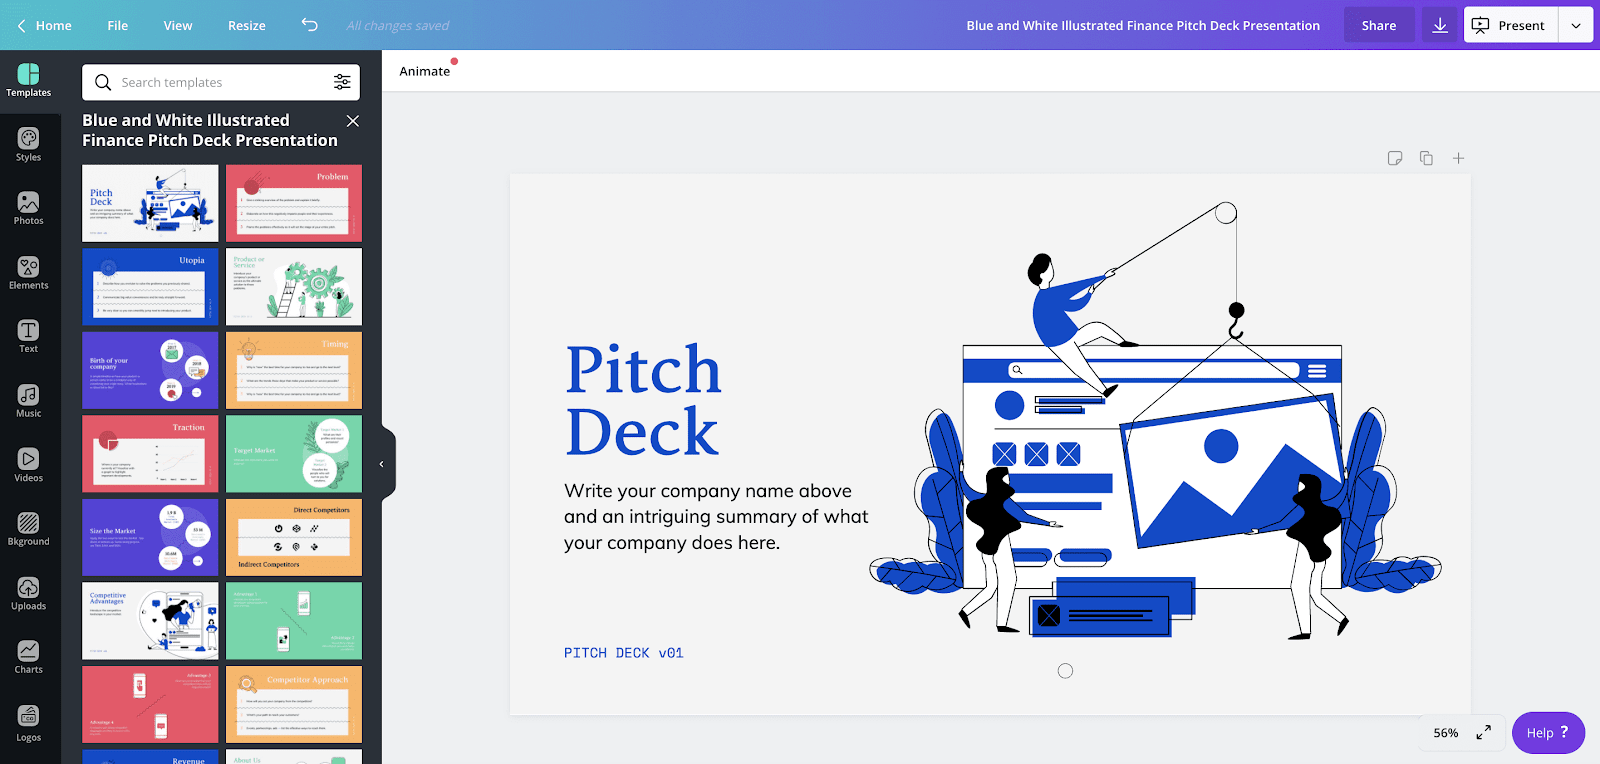 20 Best Pitch Deck Examples From Successful Startups (2021)